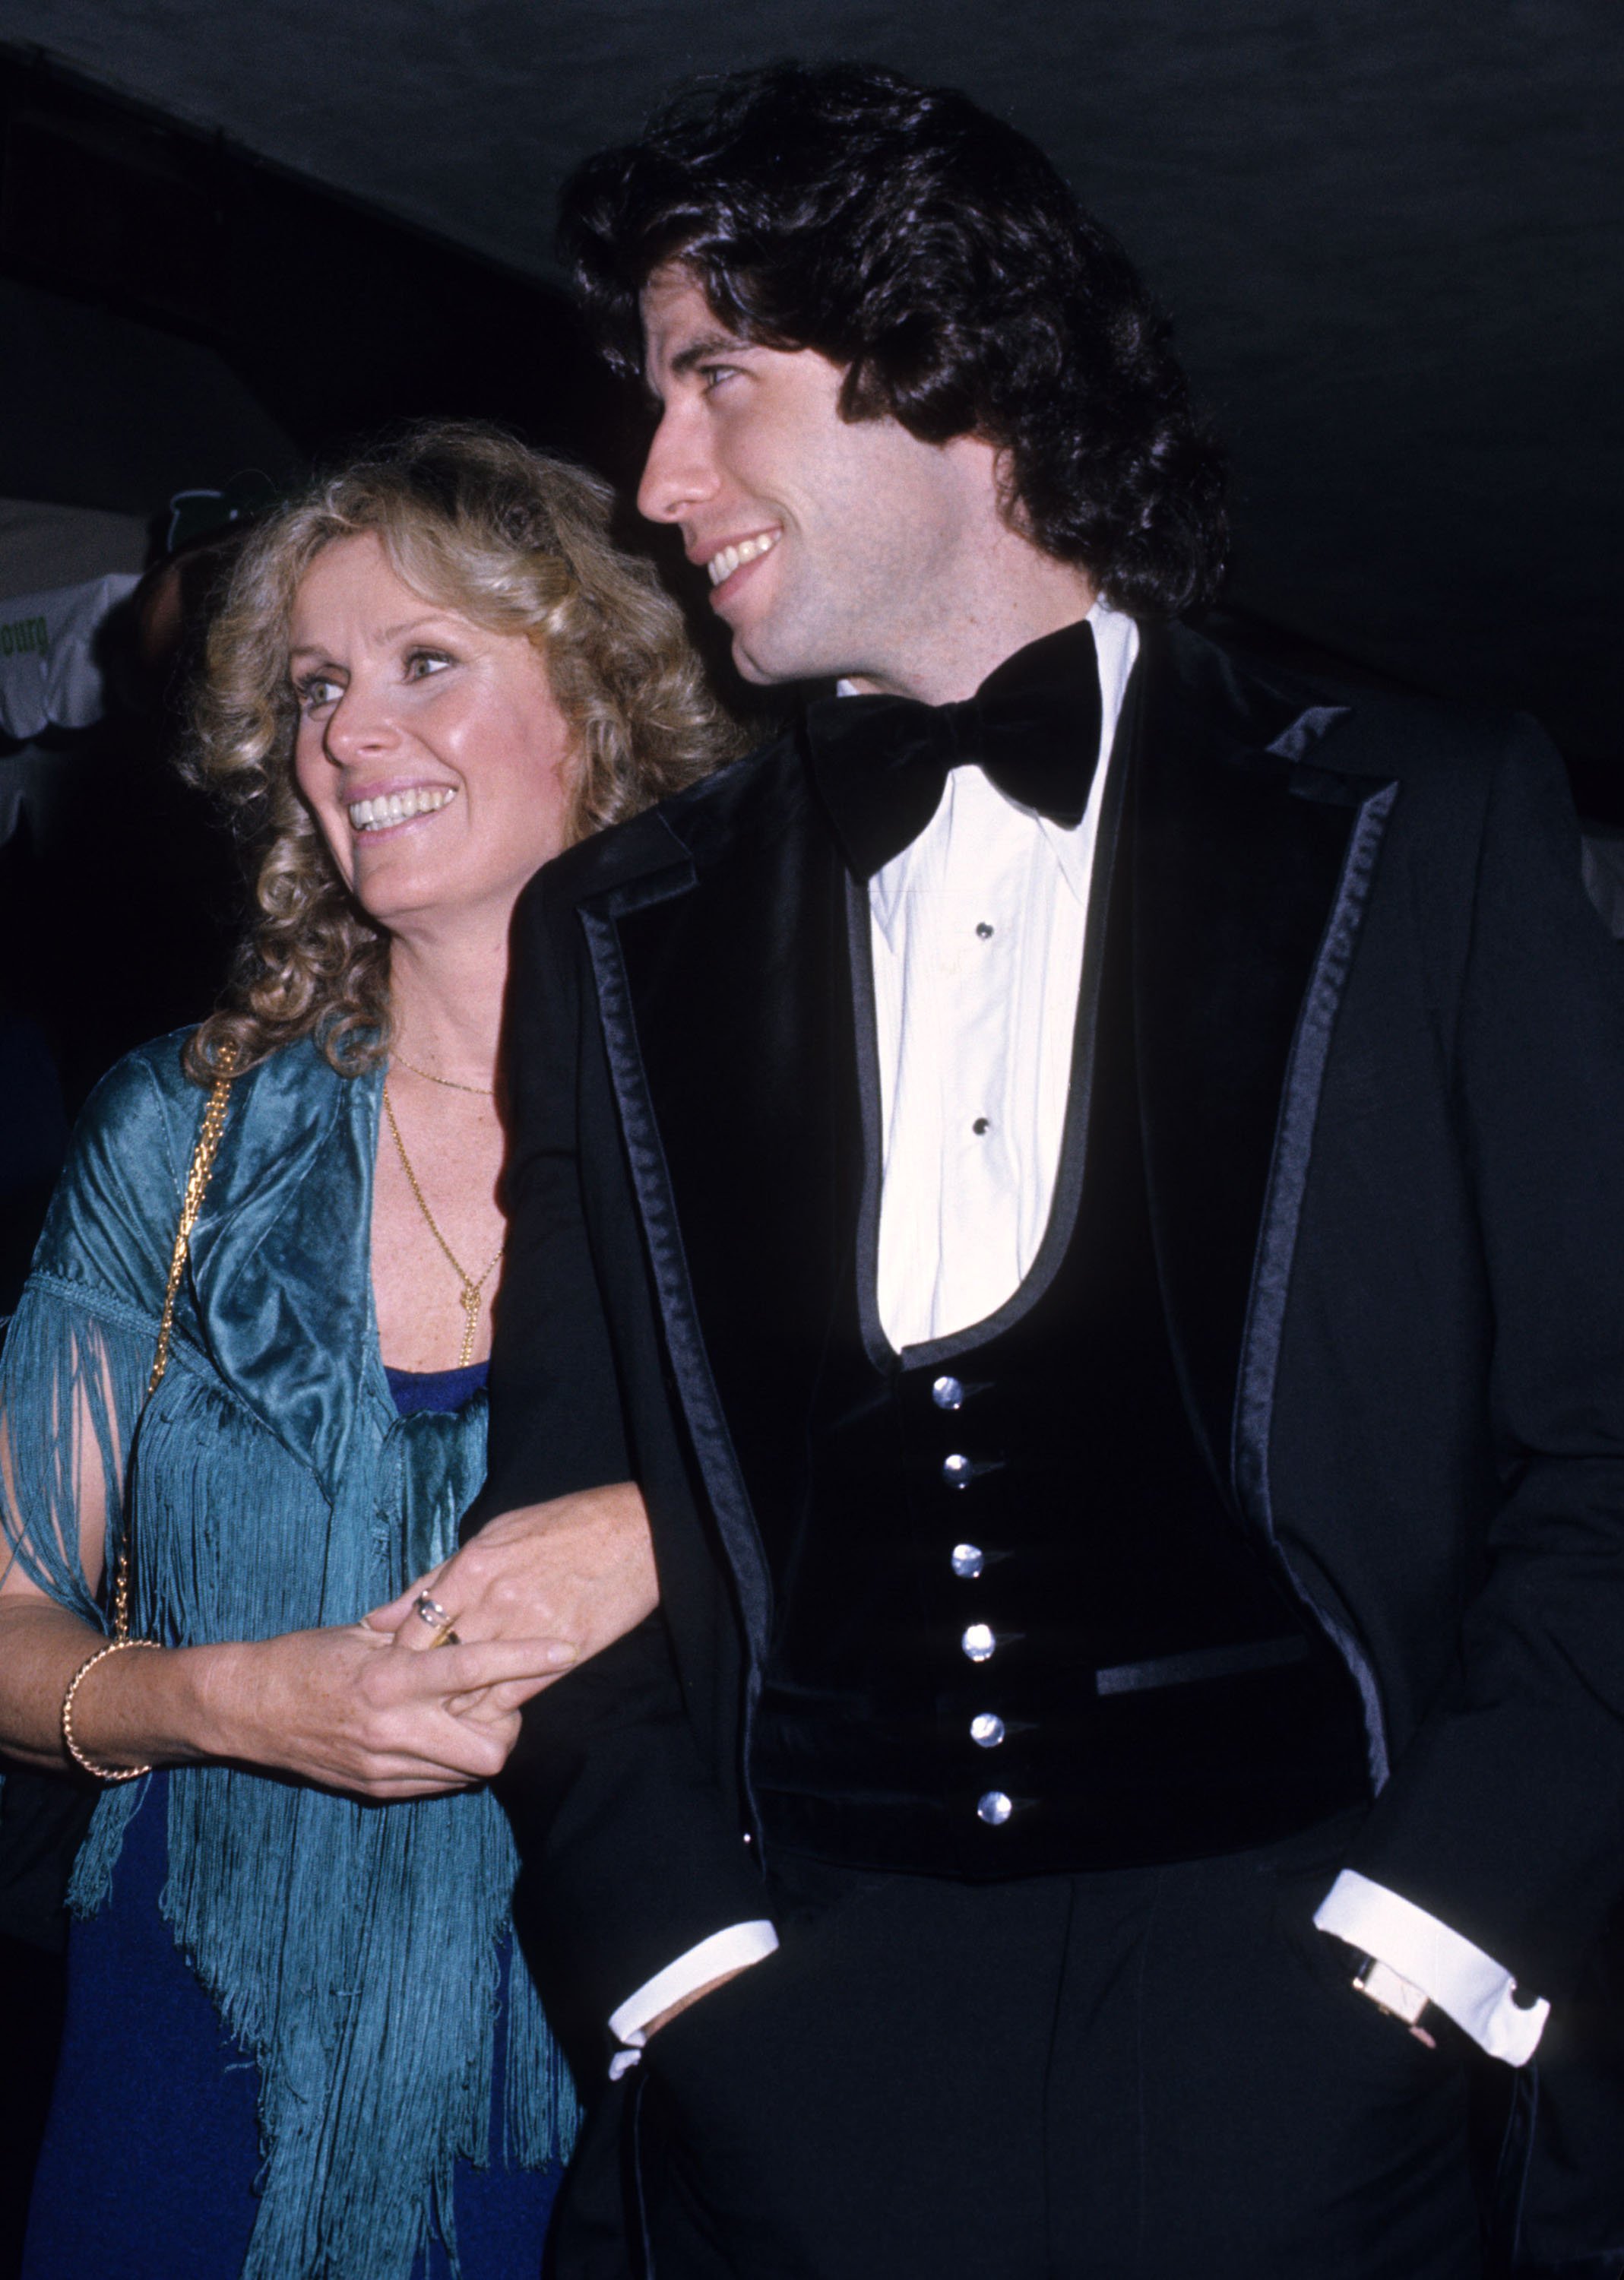 John Travolta and Diana Hyland in Los Angeles on December 8th 1976. | Source: Getty Images